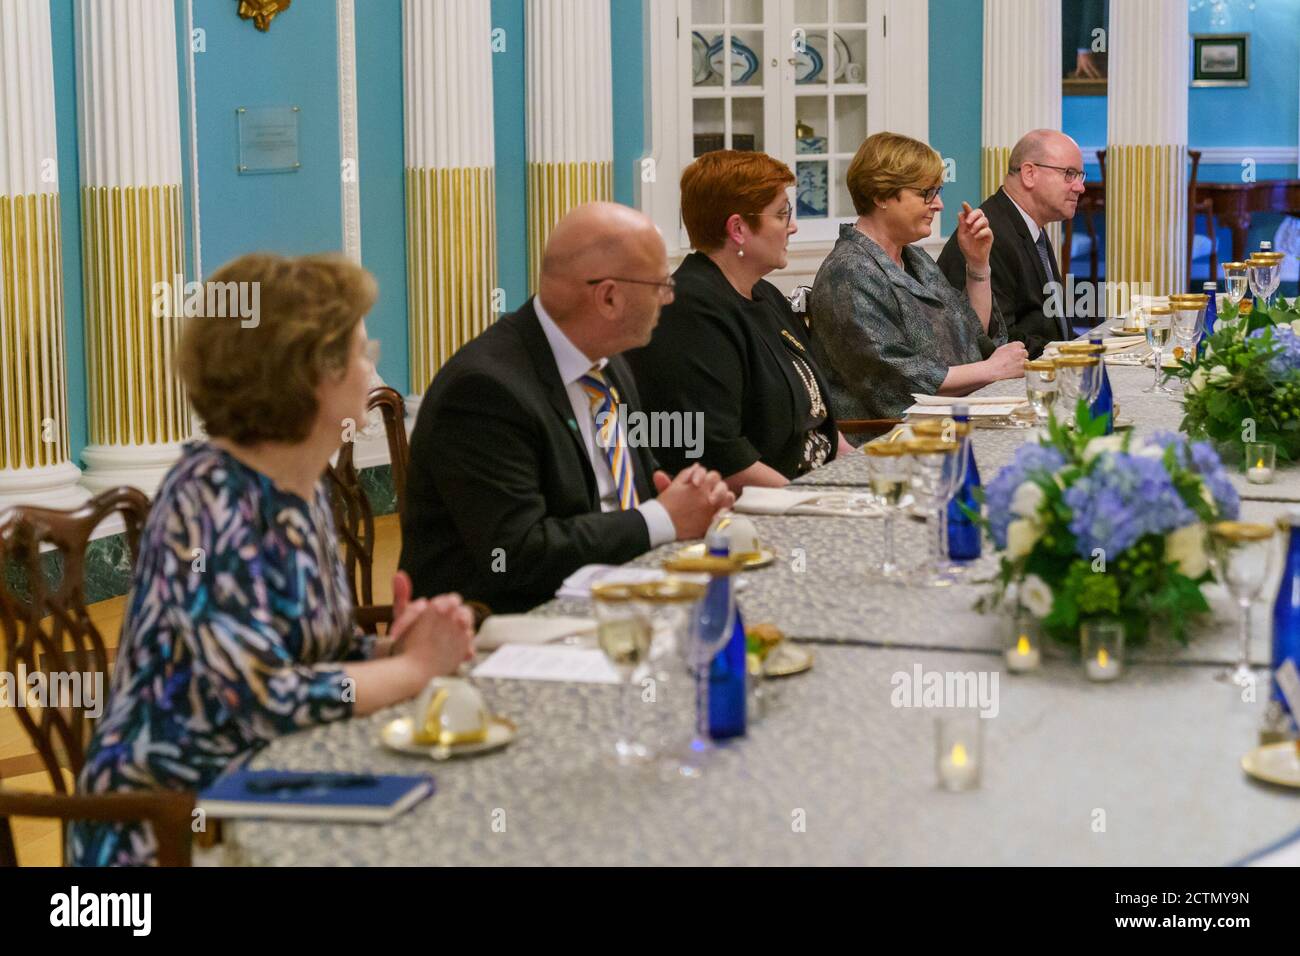 Secretary Pompeo and Secretary of Defense Mark Esper Host Australian Foreign Minister Marise Payne and Australian Defence Minister Linda Reynolds . Secretary of State Michael R.  Pompeo and Secretary of Defense Mark Esper host Australian Foreign Minister Marise Payne and Australian Defence Minister Linda Reynolds for an AUSMIN working dinner, at the Department of State, on July 27, 2020. Stock Photo